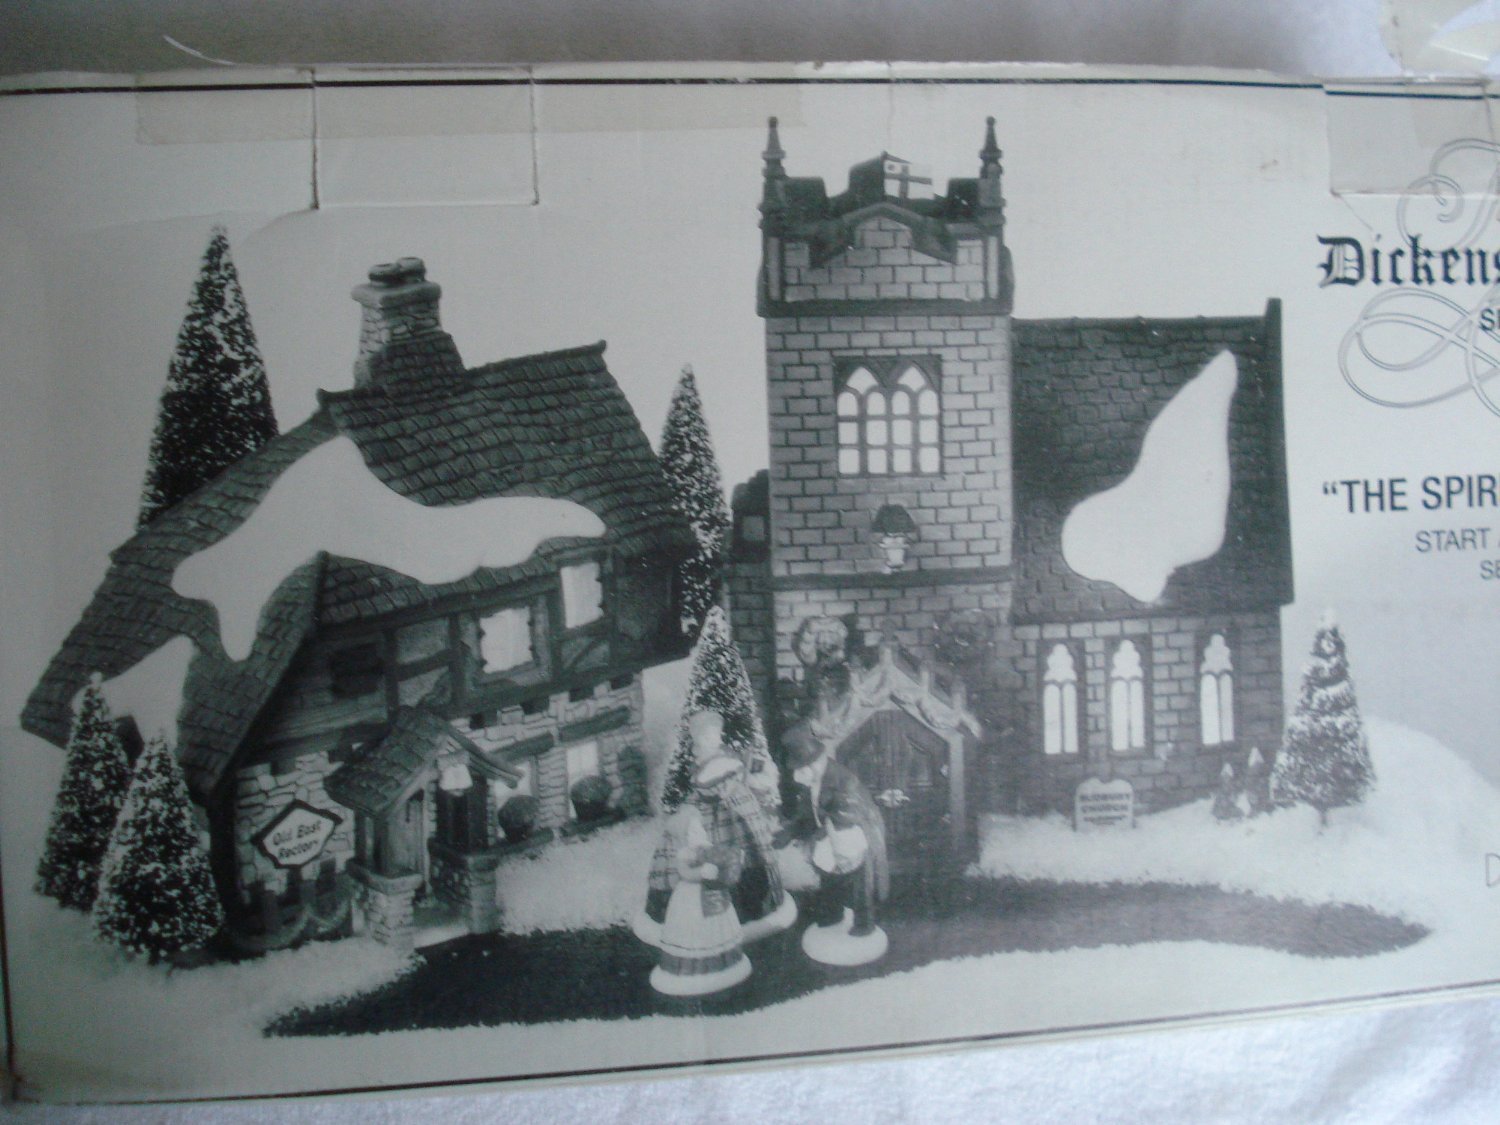 Primary image for Department 56 Dickens Village Start A Tradition Set 58322